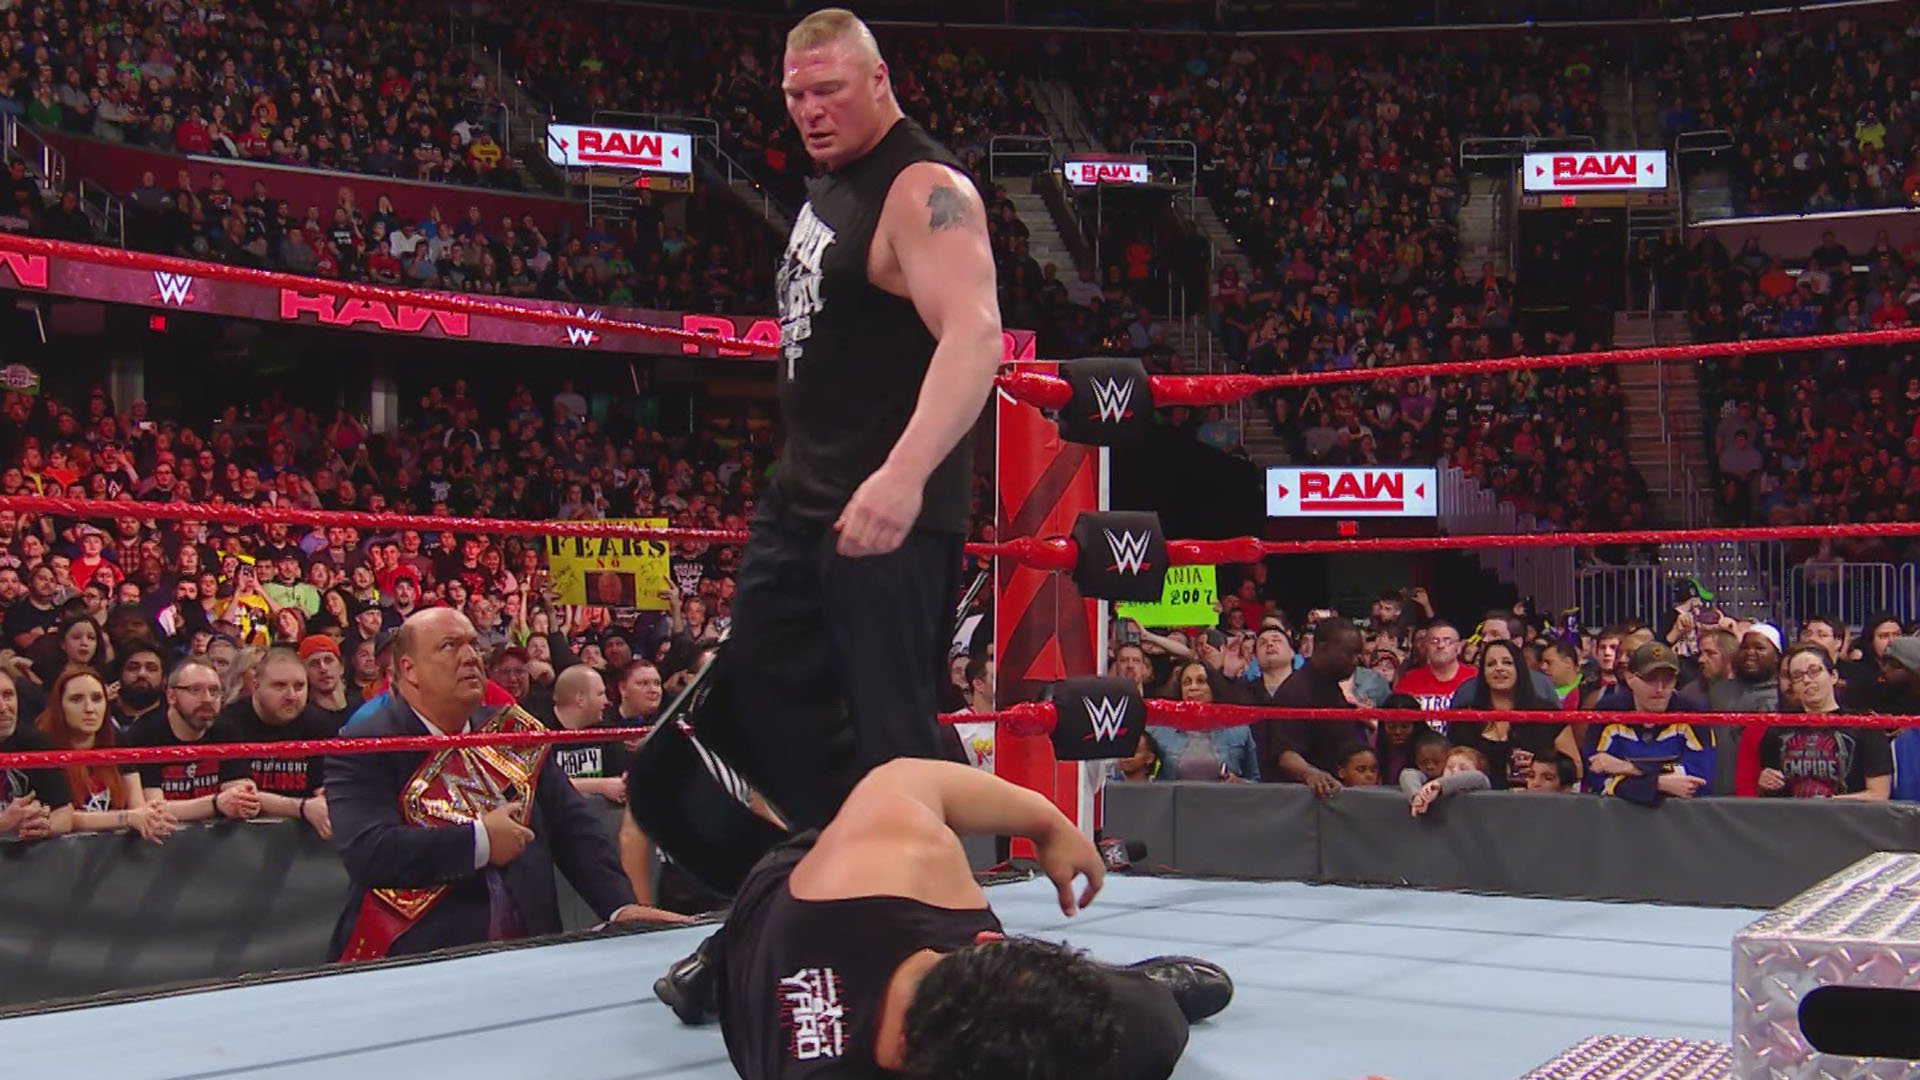 Roman Reigns confronted Universal Champion Brock Lesnar